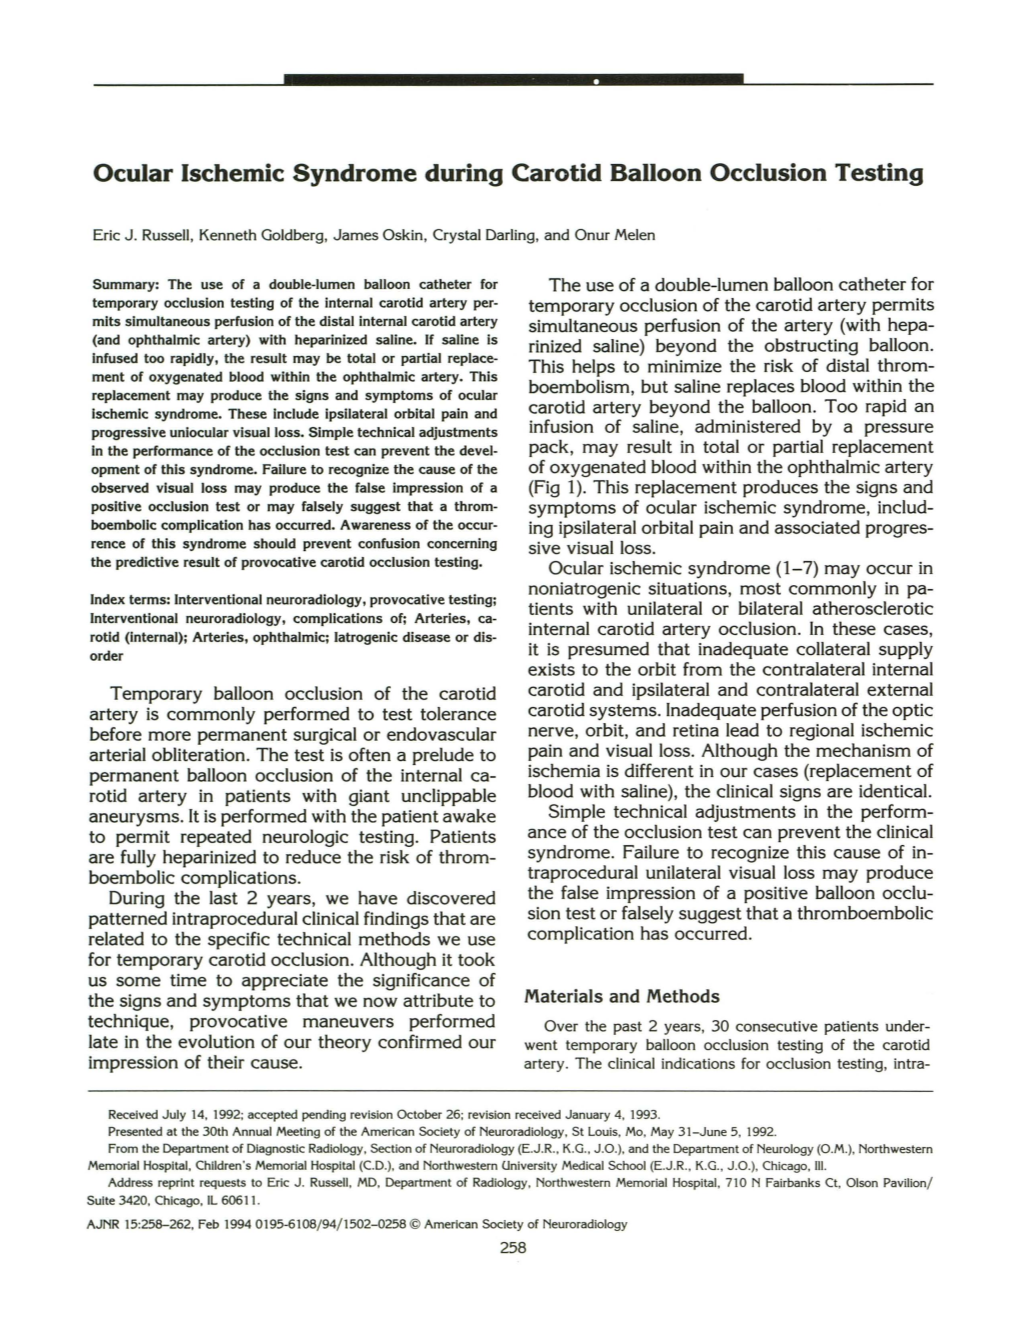 Ocular Ischemic Syndrome During Carotid Balloon Occlusion Testing